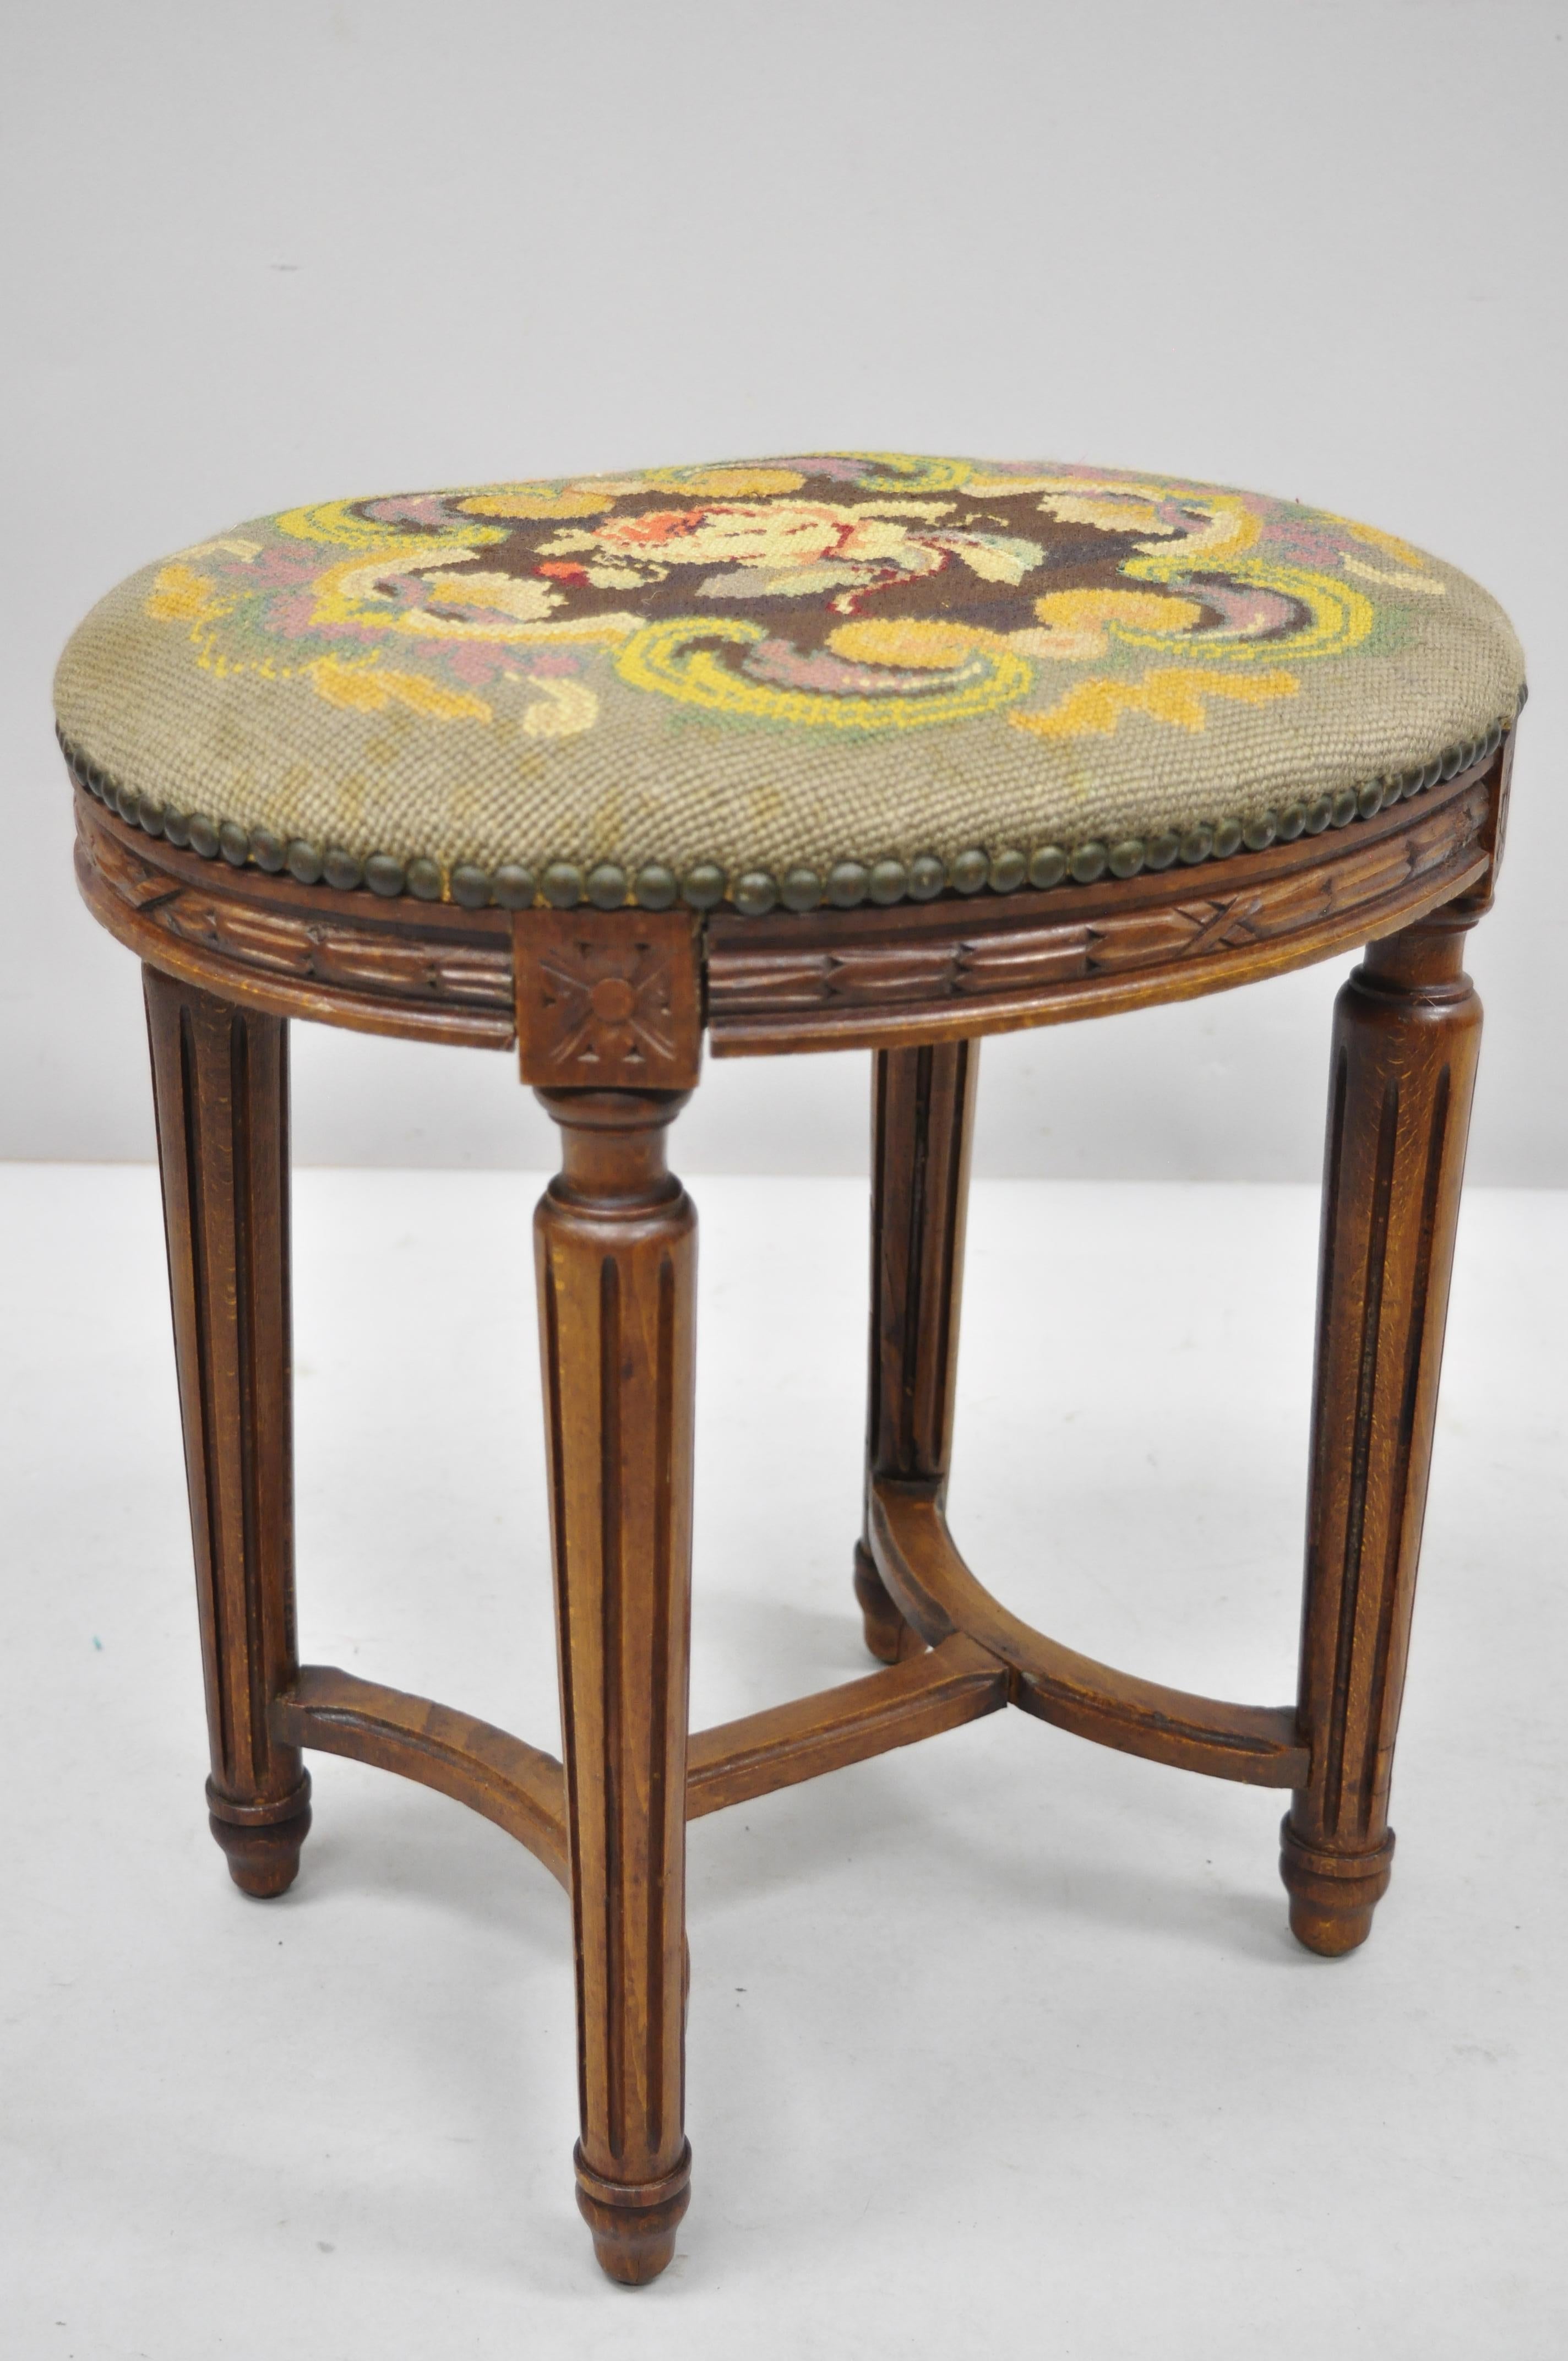 Pair of French Louis XVI style carved walnut and needlepoint oval stools. Item features floral needlepoint upholstery, remnants of label, solid wood frame, beautiful wood grain, tapered legs, very nice antique item, circa early 20th century.